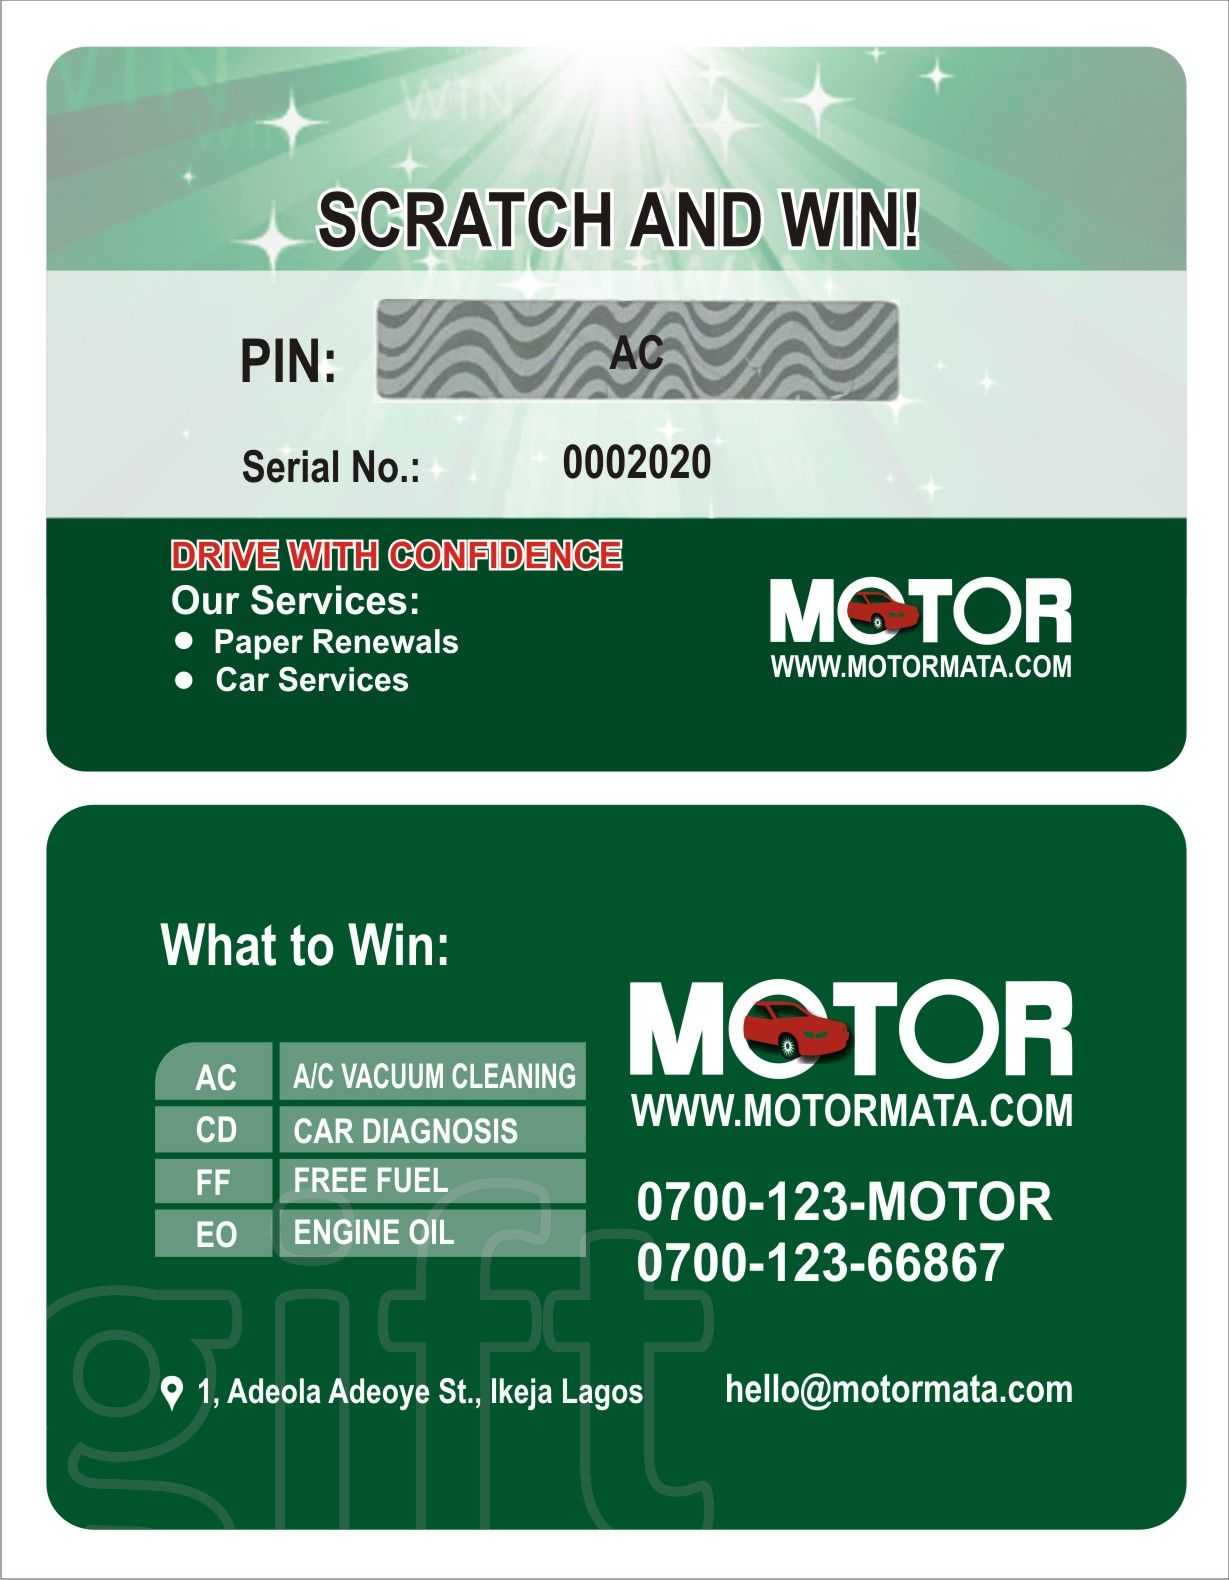 CALL CHINEDU ON 09022536974 TO PRINT SCRATCH AND WIN PROMO CARDS, PORTAL ACCESS SCRATCH CARDS, LOTTERY CARDS, PRODUCT LABELL, ETC